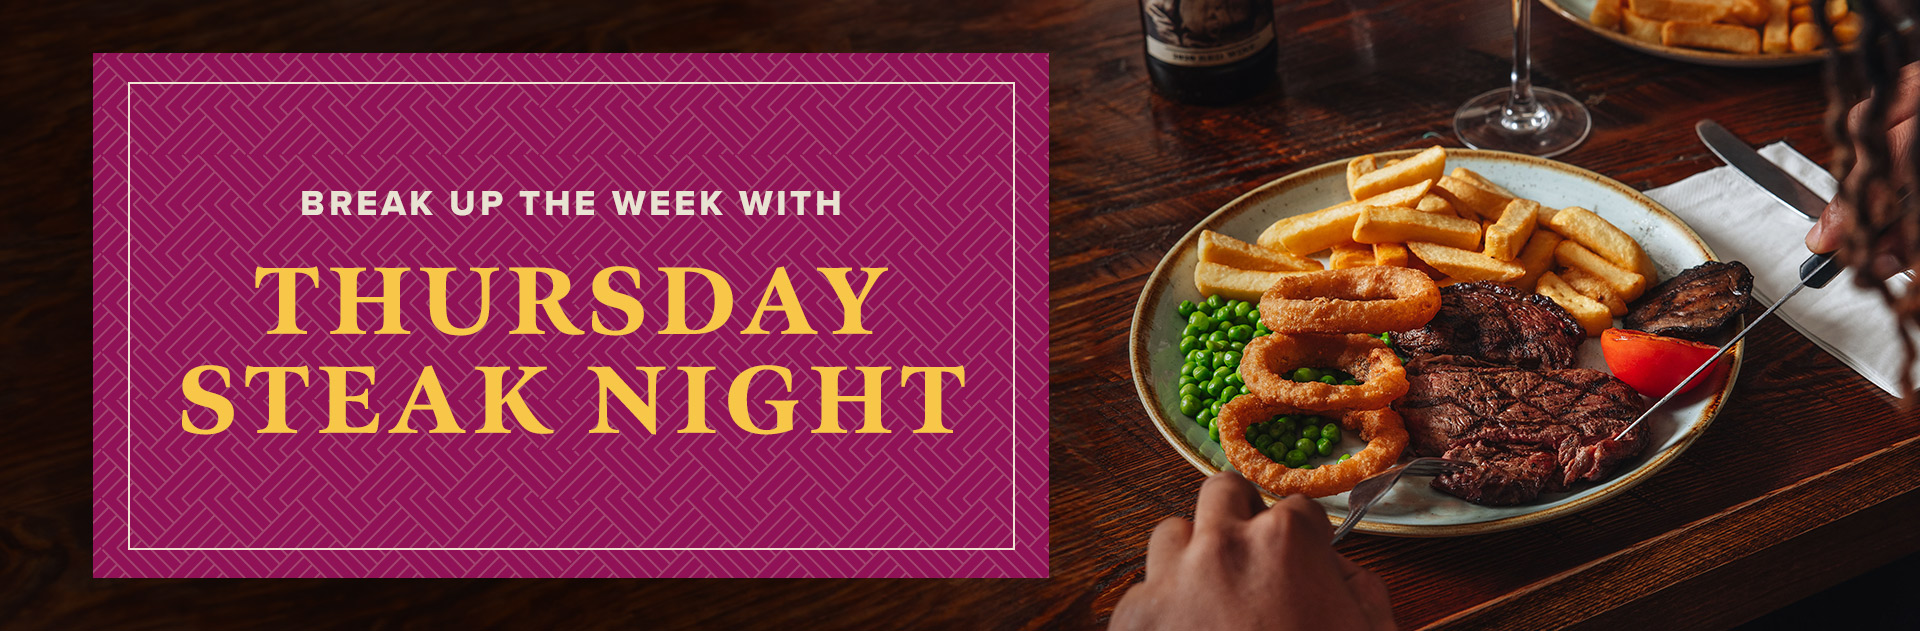 Thursday Steak Night at The Mawney Arms